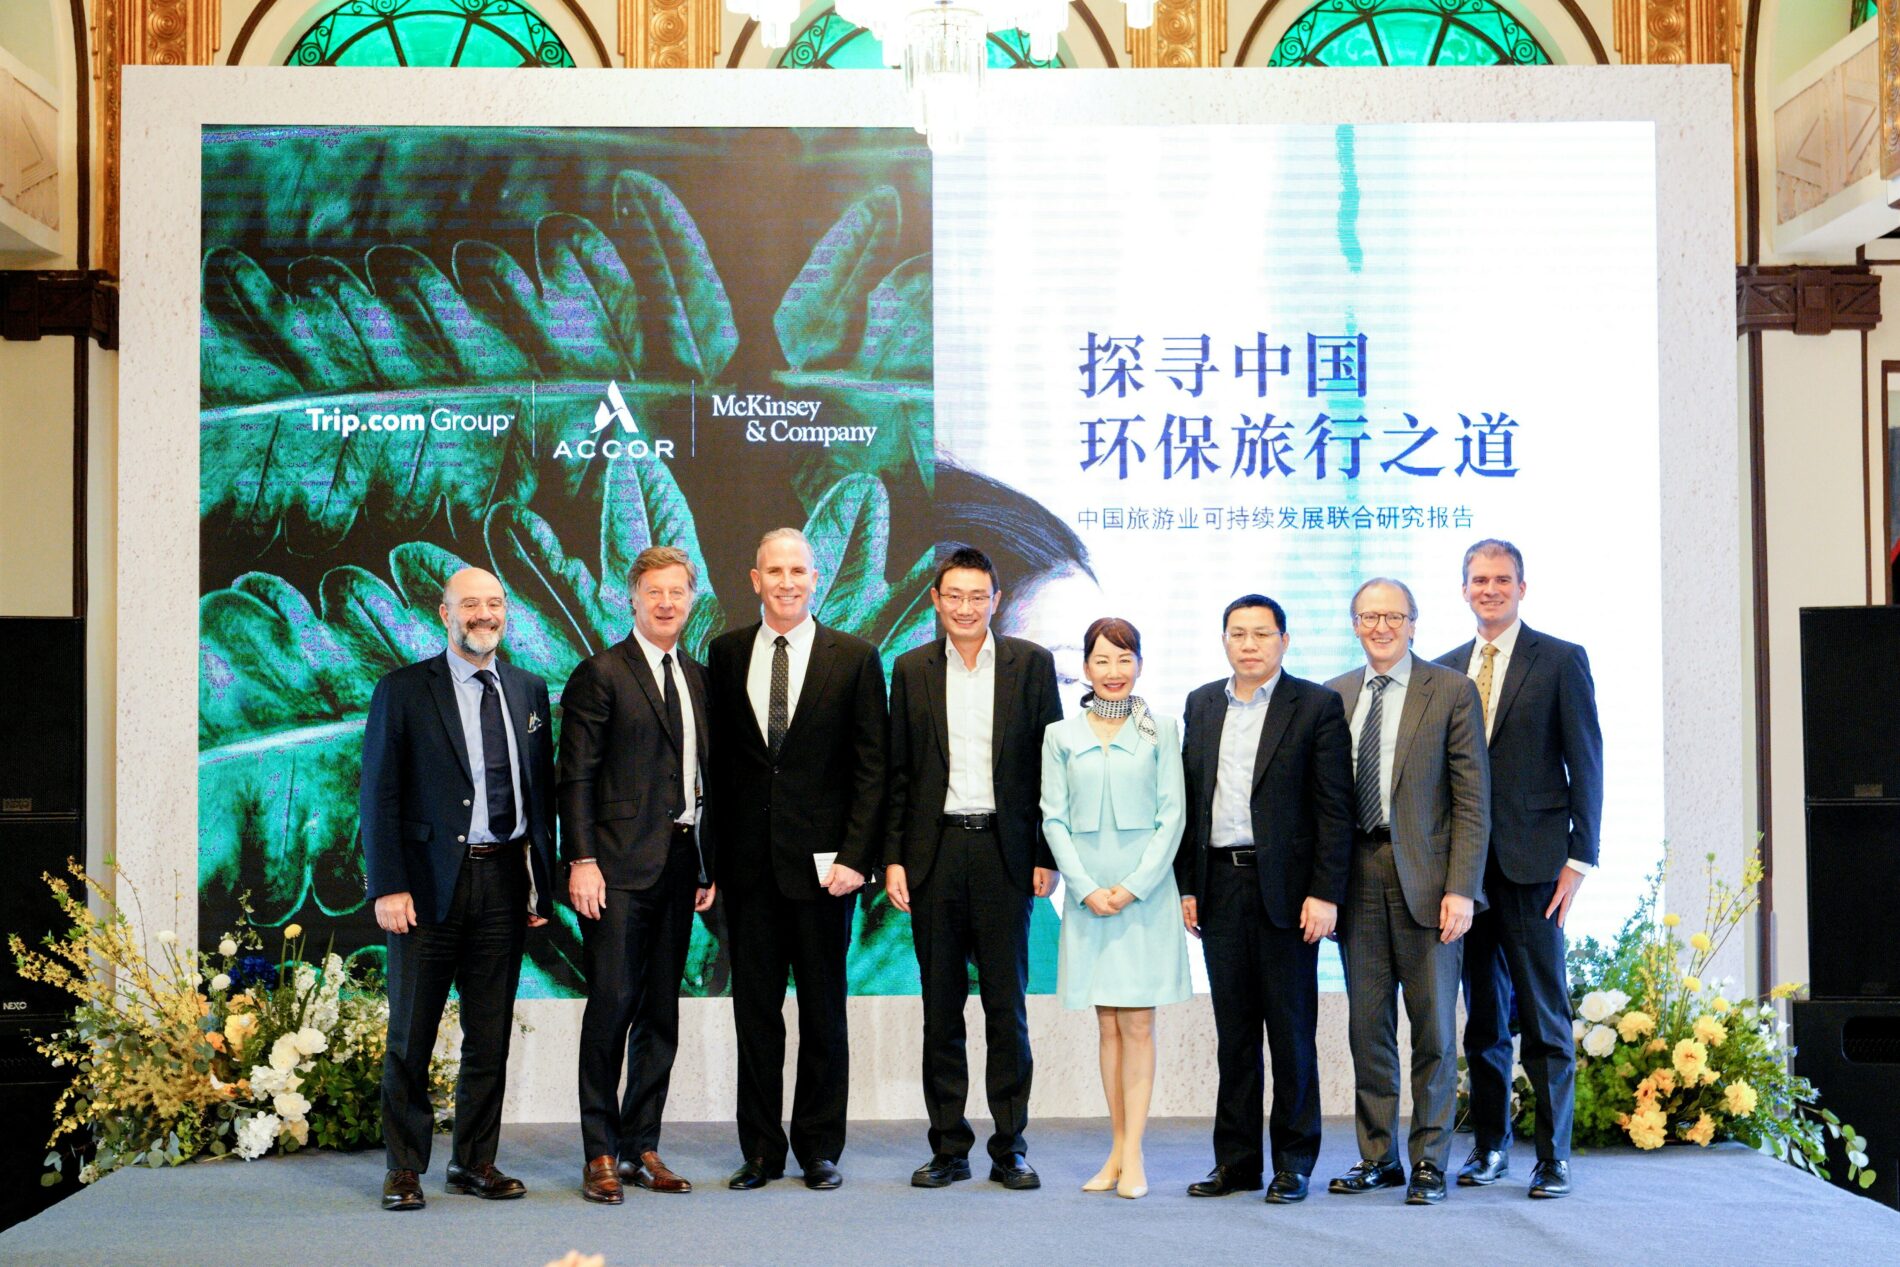  (From left to right: Mr. Jean-Jacques Morin, Group Deputy CEO, Group CFO and Premium, Midscale & Economy Division CEO, Accor; Mr. Sébastien Bazin, Chairman and CEO, Accor; Mr. Gary Rosen, CEO, Accor Greater China; Ray Chen, SVP of Trip.com Group, CEO of Accommodation Business Group; Ms. Jane Sun, CEO of Trip.com Group; Mr. Li Binghua, Division Director, Market Management Office, Shanghai Municipal Bureau of Culture and Tourism; Mr. Jonathan Woetzel, Director of McKinsey Global Institute, Senior Partner of McKinsey & Company; Mr. Steve Saxon, Partner of McKinsey & Company)